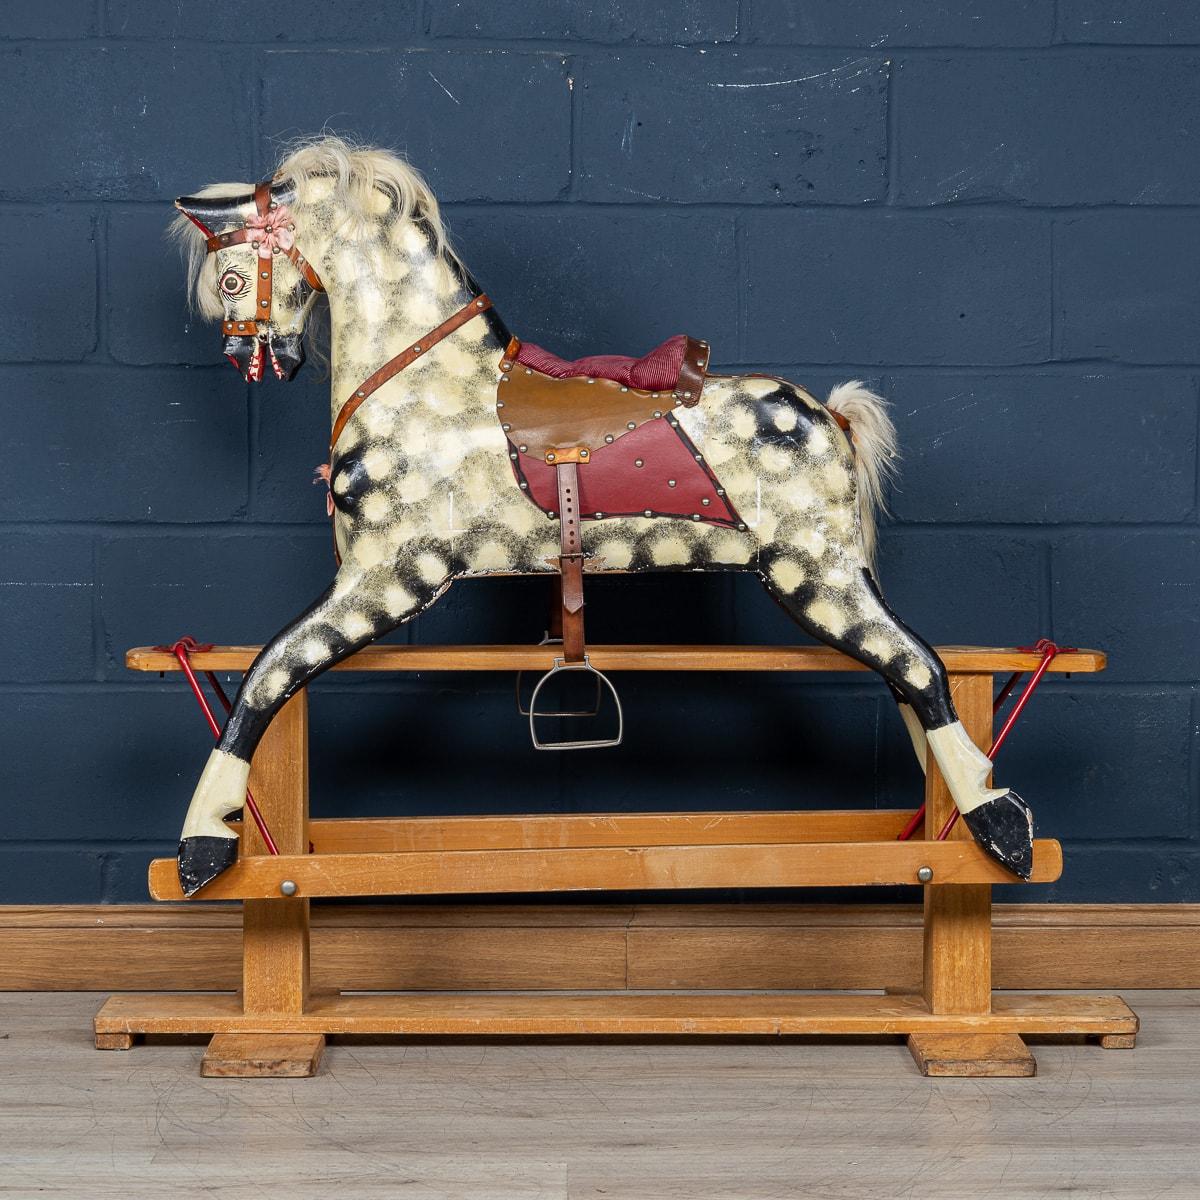 One of the most popular rocking horse manufacturers and probably the longest-established English rocking horse maker is J. Collinson traces its roots back to Liverpool in 1836. This beautiful vintage carved wooden rocking horse was made by Collison